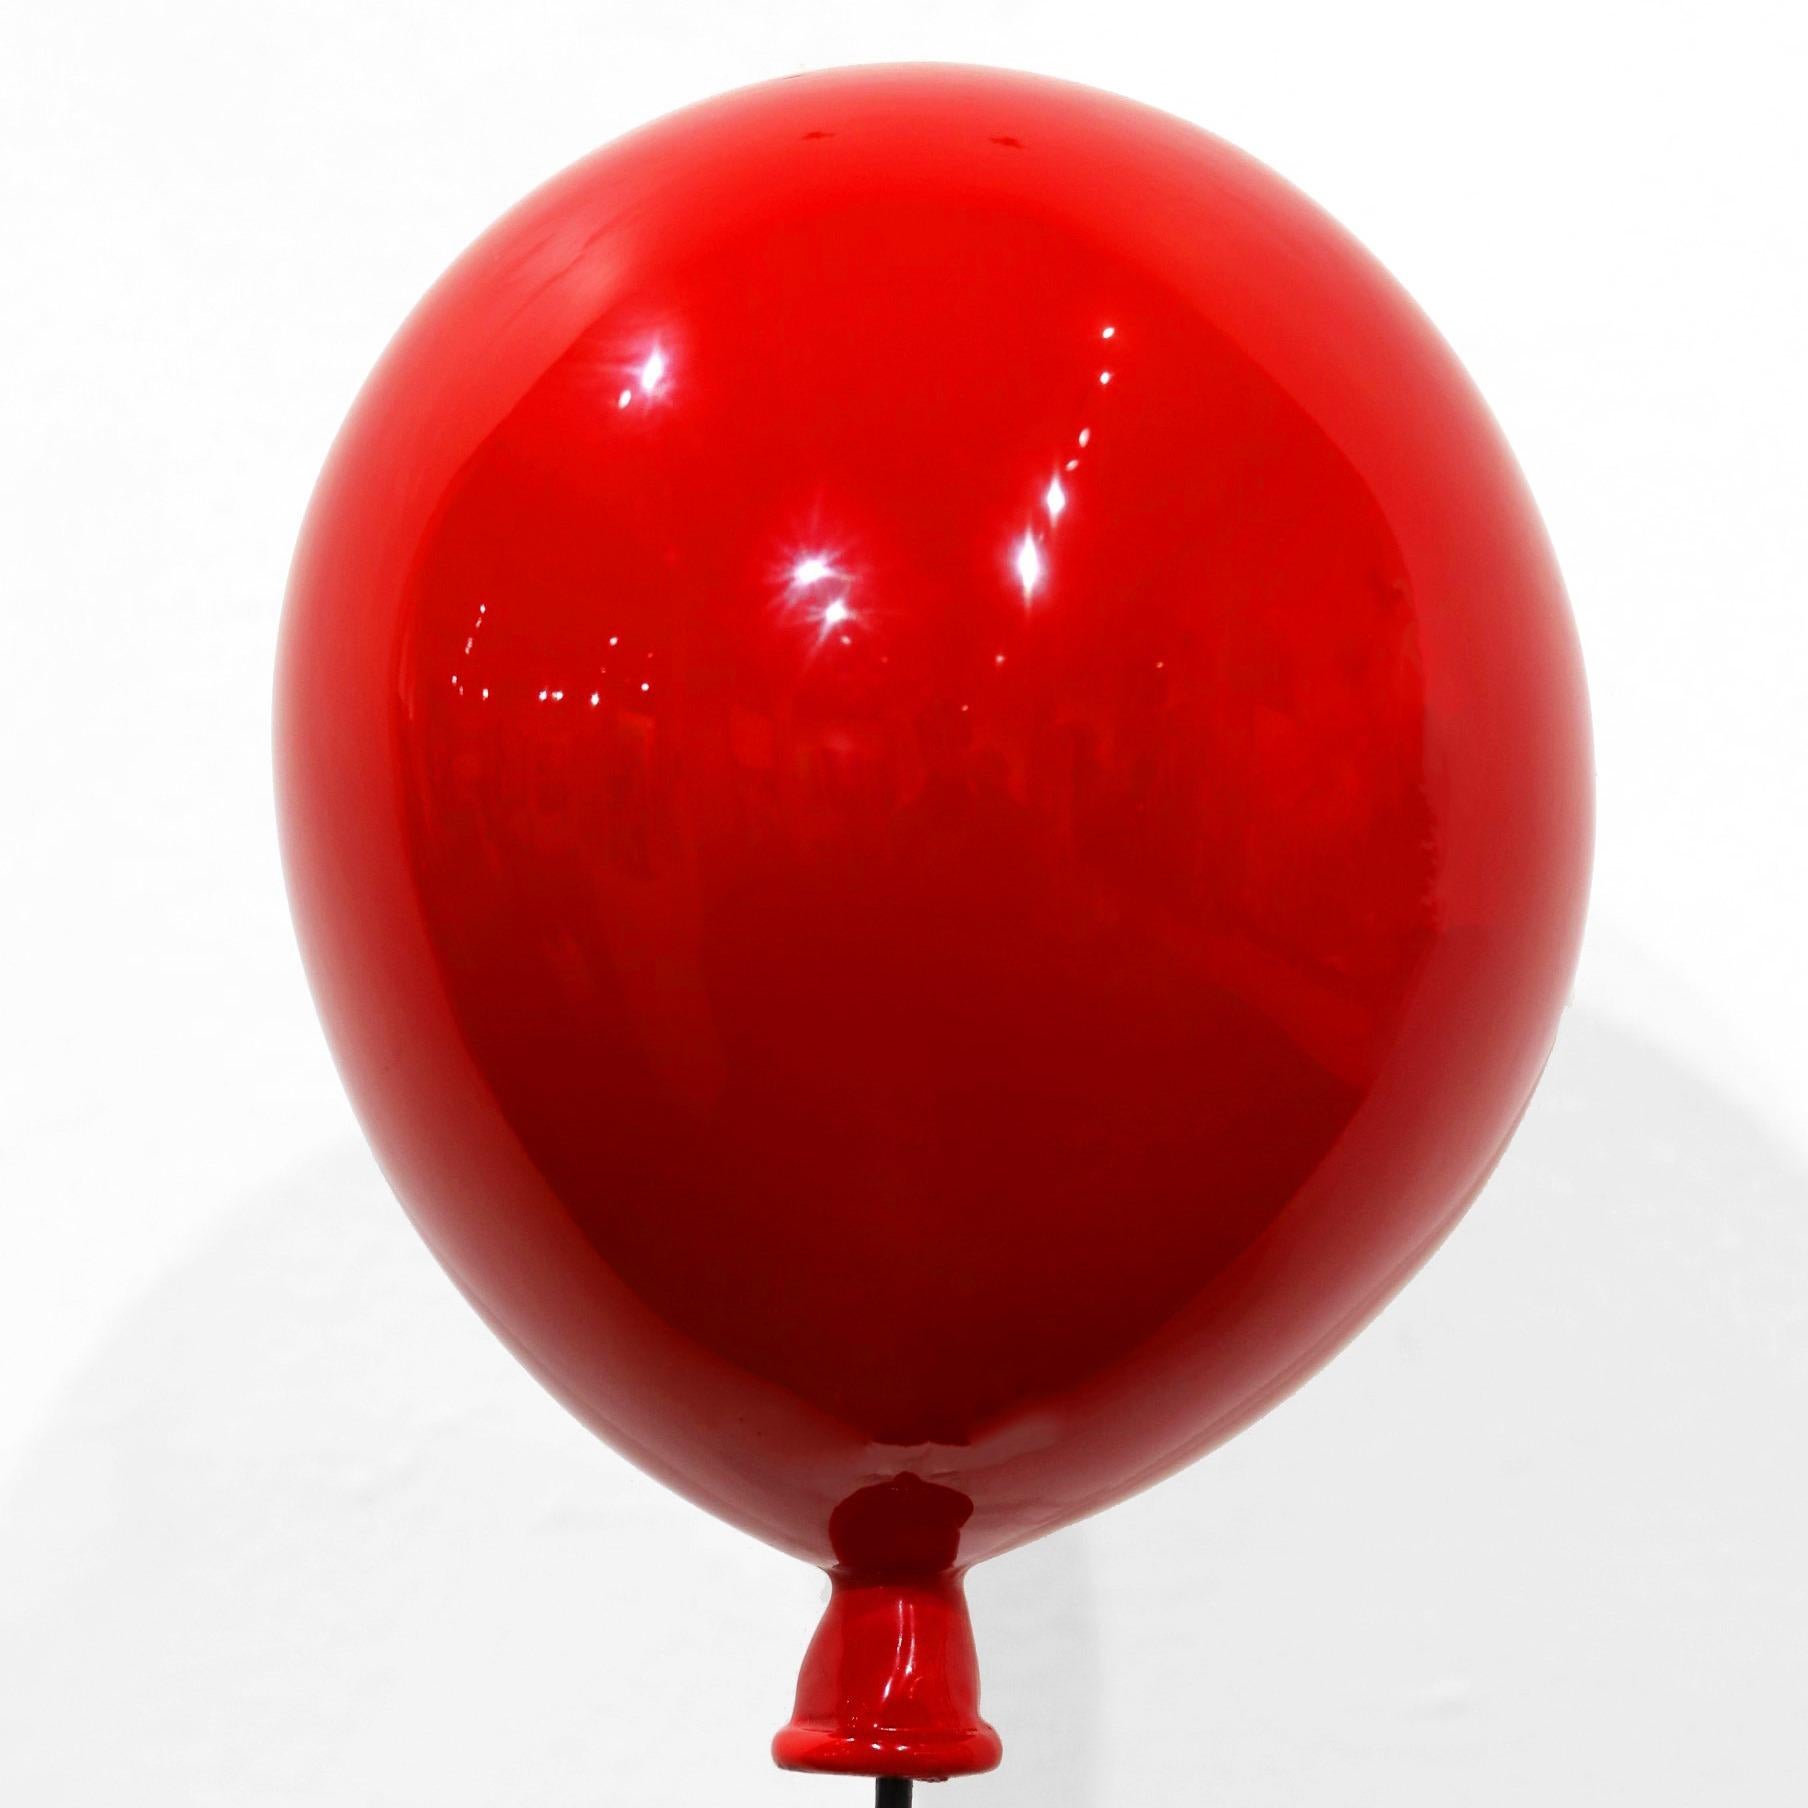 Hope (23/25) - Figurative Steel Sculpture with Glossy Red Balloon - Black Figurative Sculpture by Nayla Saroufim